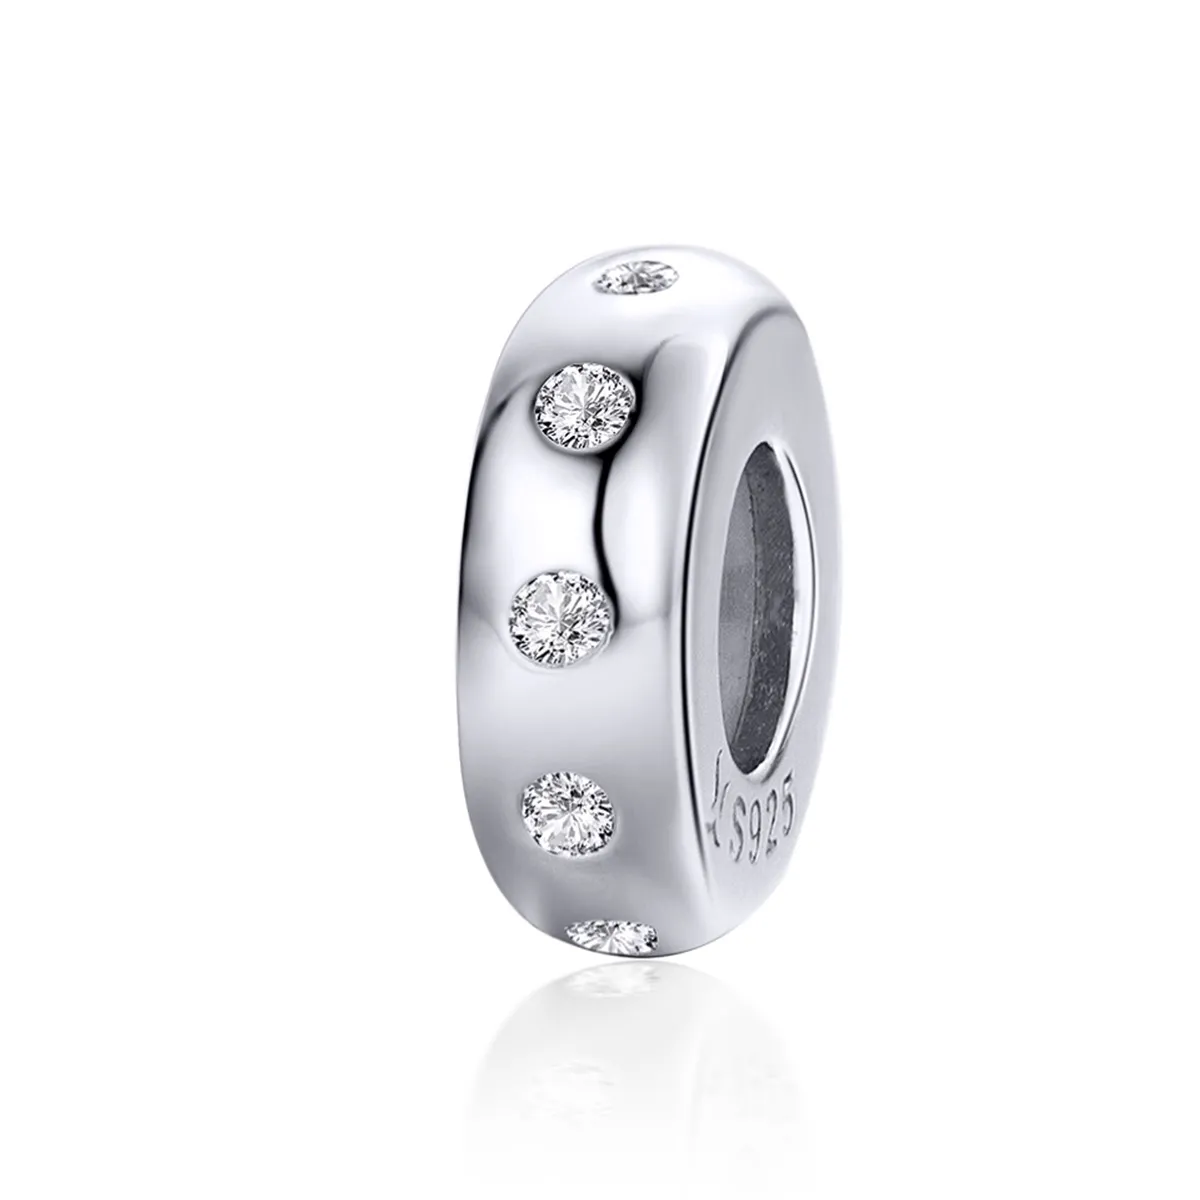 Pandora Style Silver Glittering Spacer - SCC1171